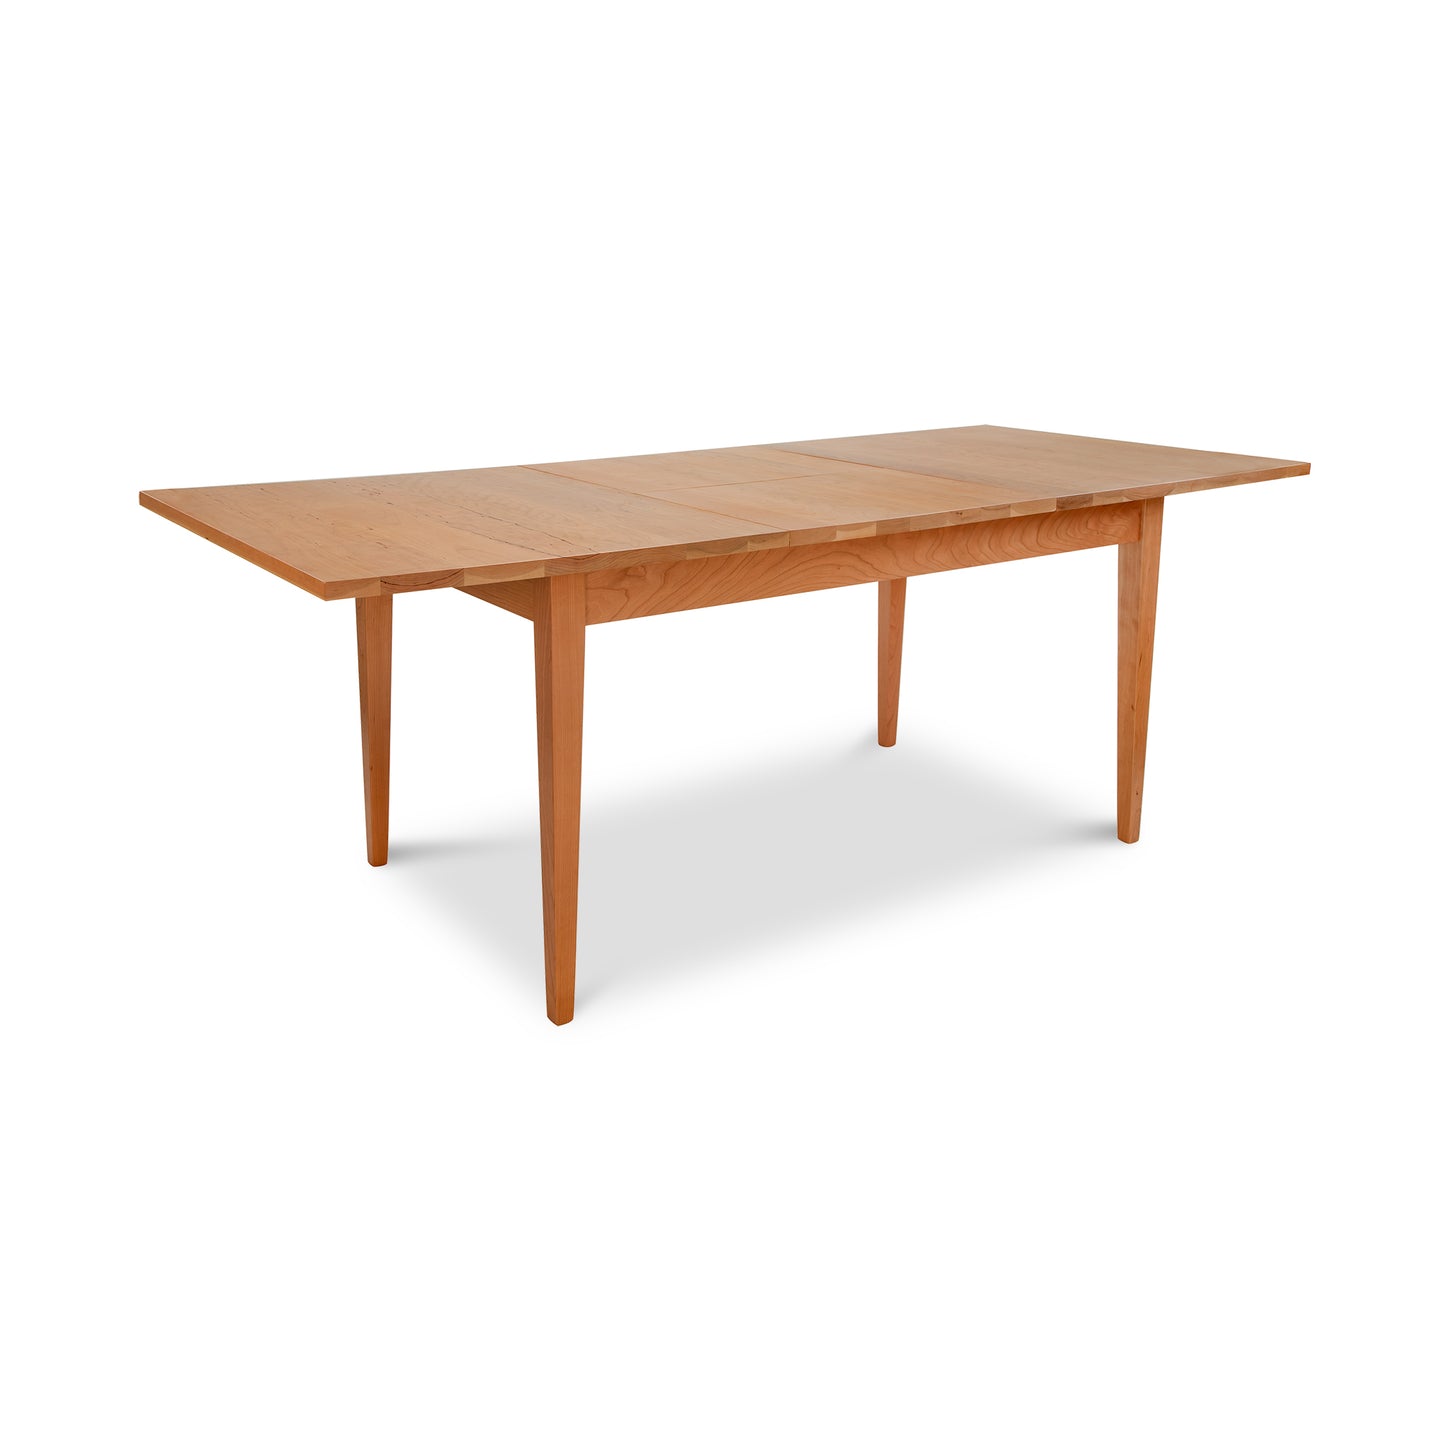 A Classic Shaker Butterfly Extension Table with a wooden top by Lyndon Furniture.